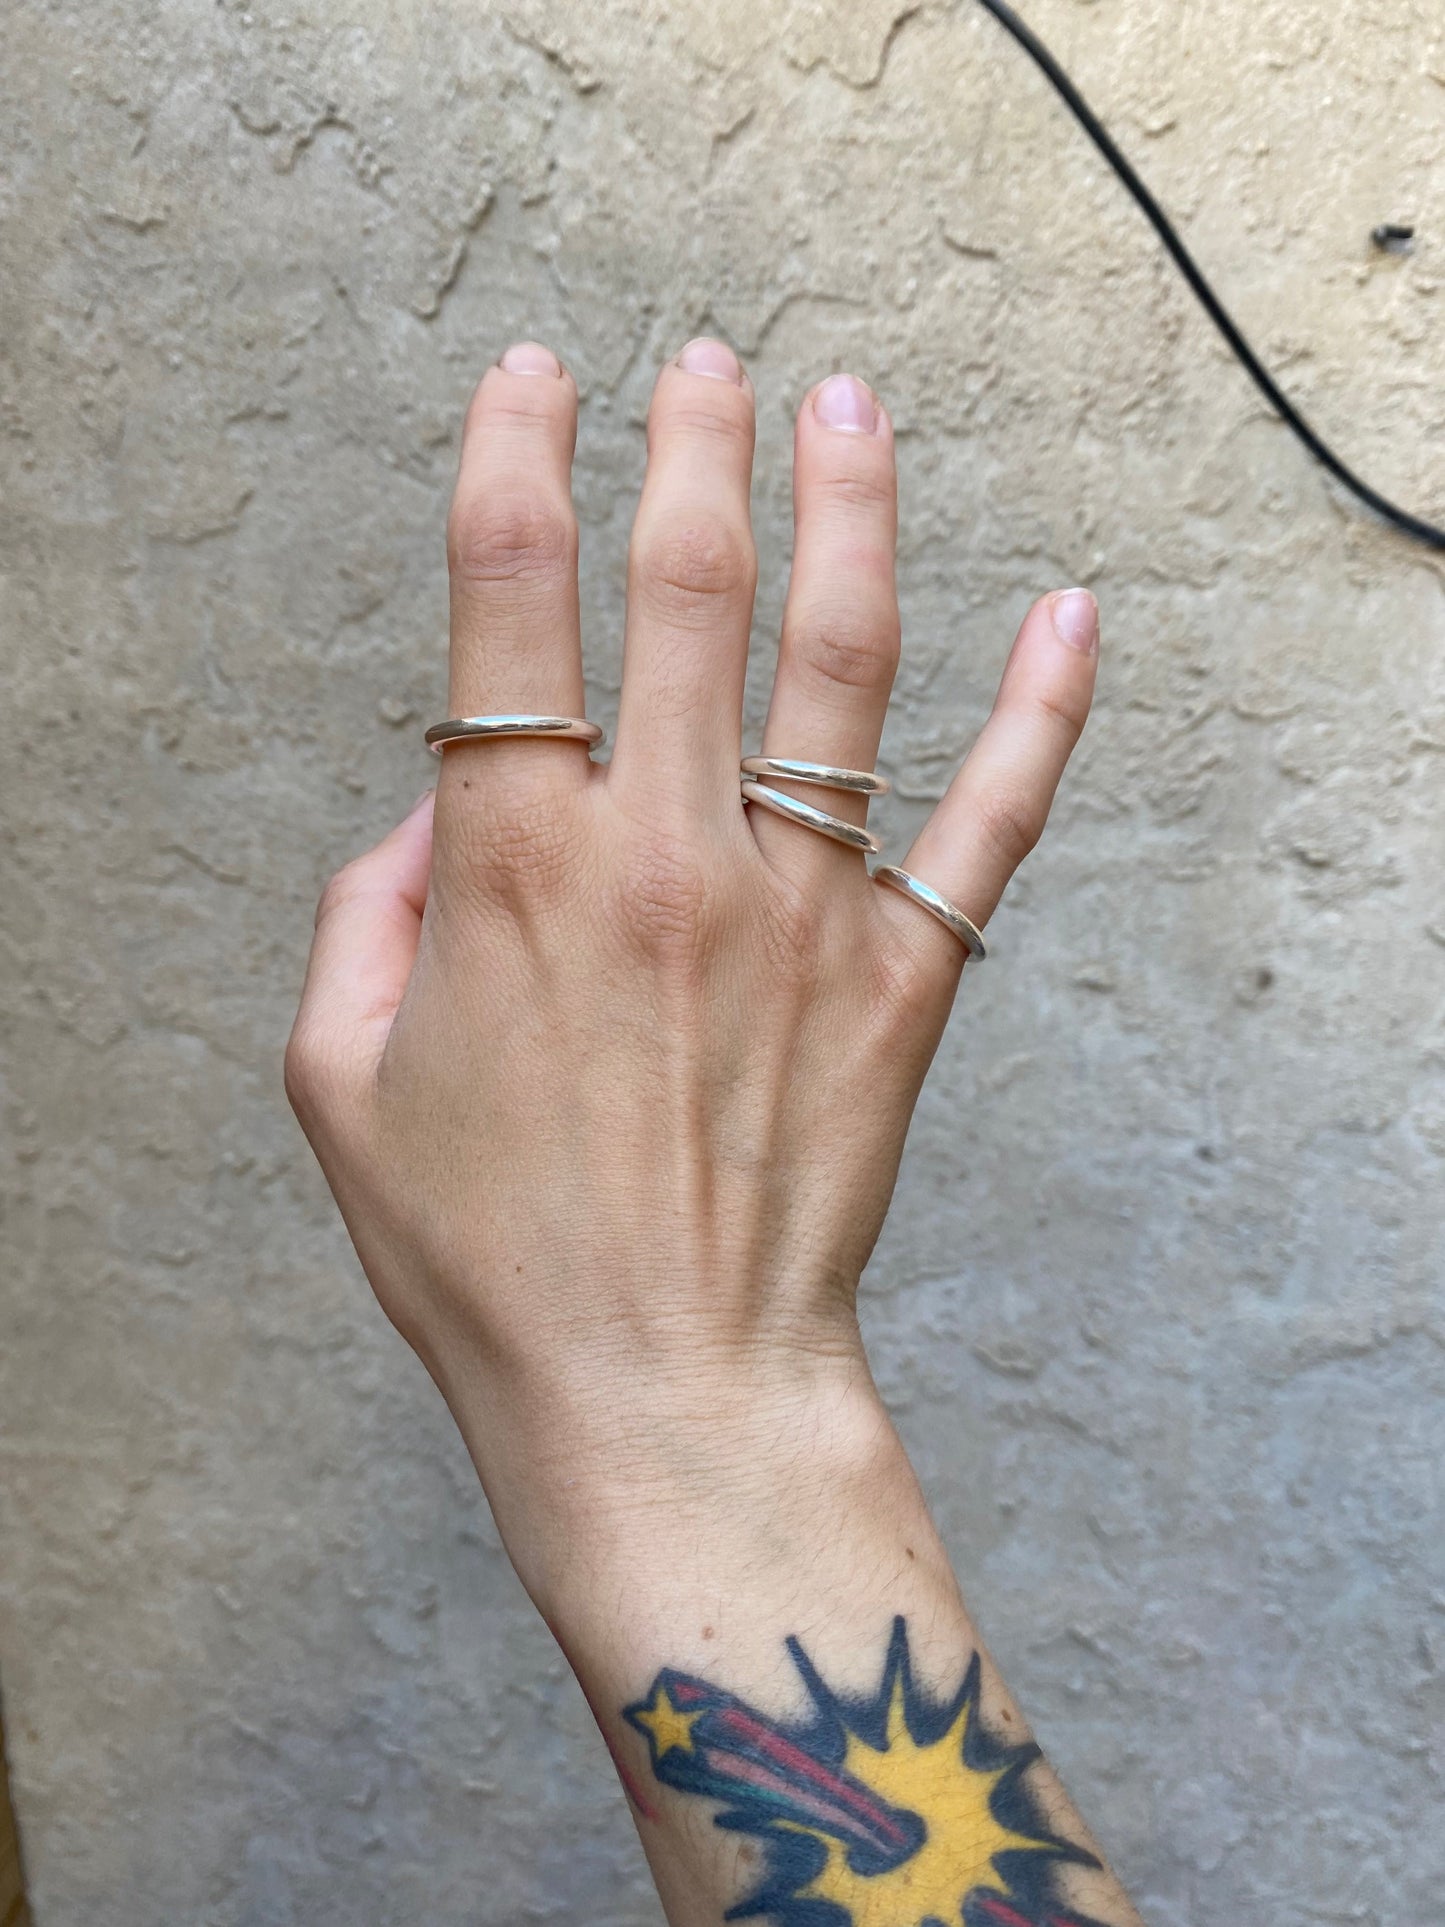 Chunky round sterling silver rings stacked on someone's right hand infront of a wall.